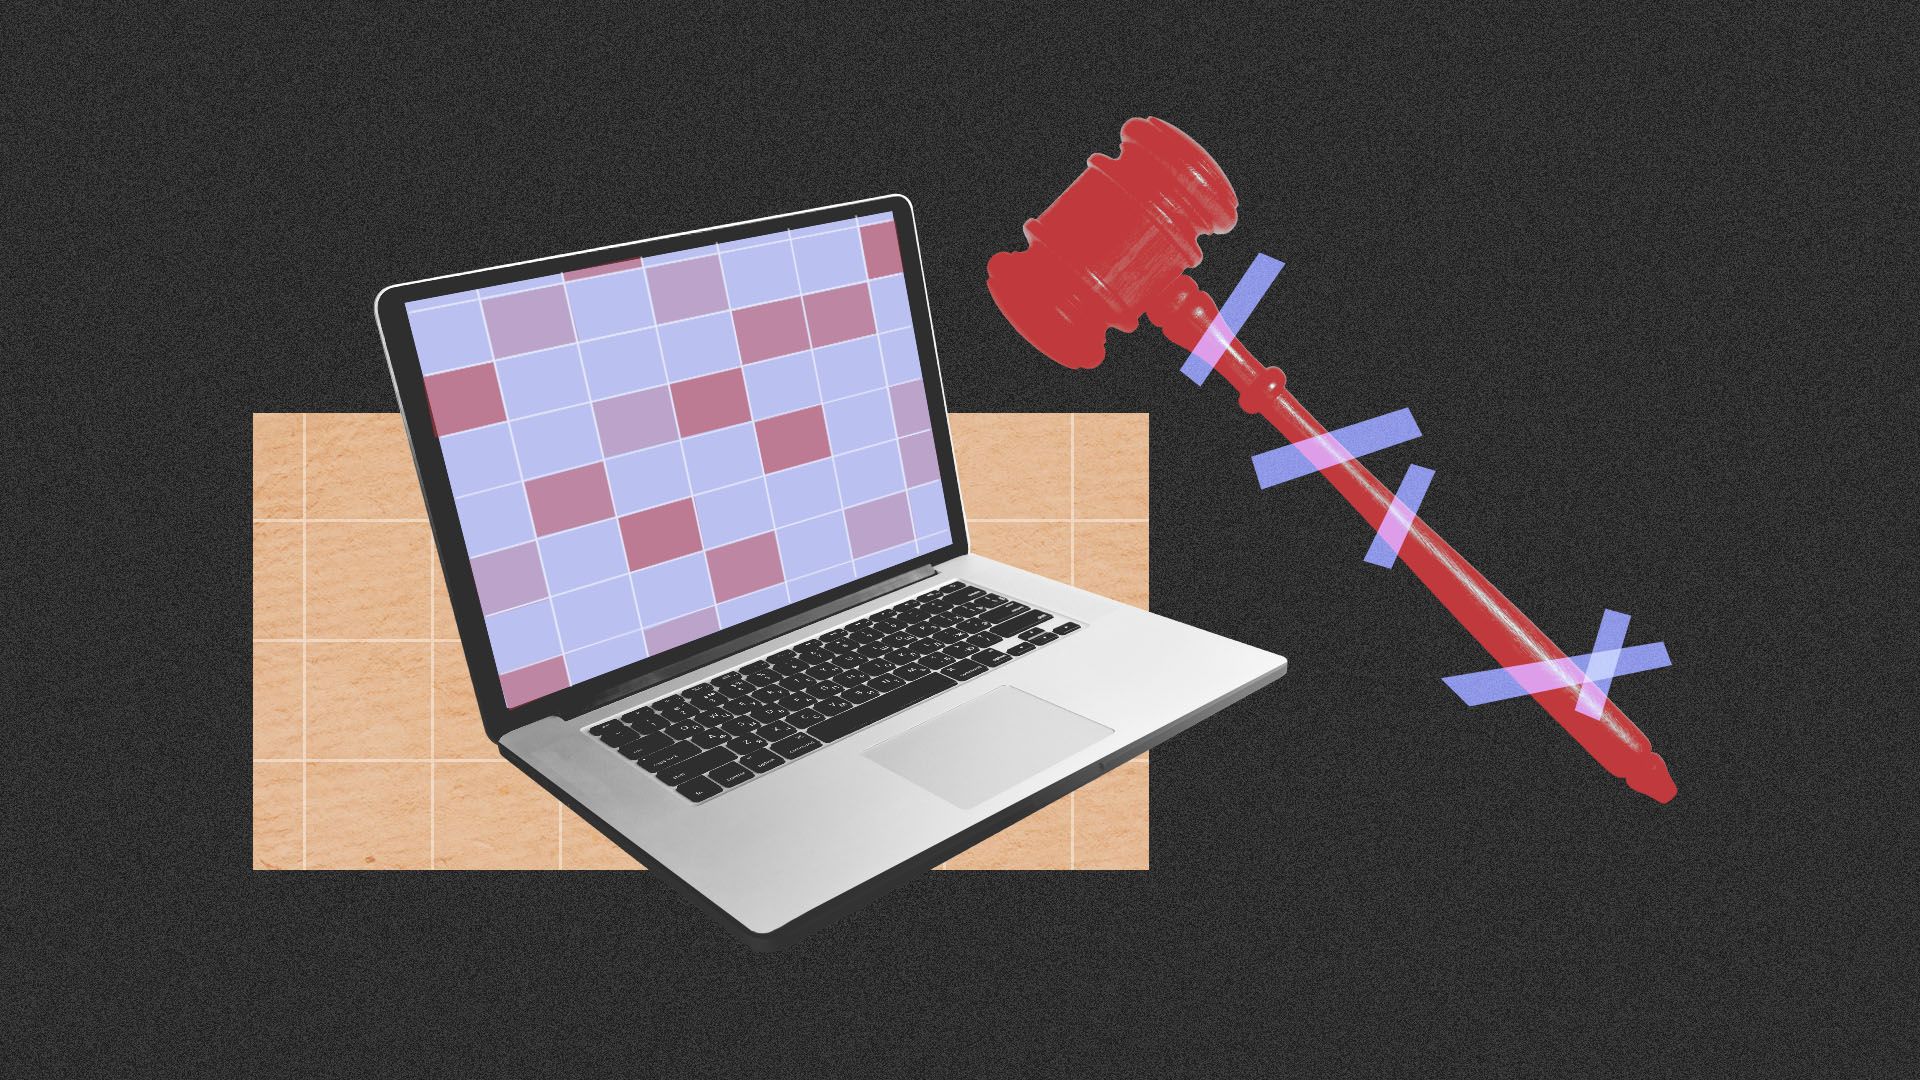 Illustration of a laptop with a red gavel beside it